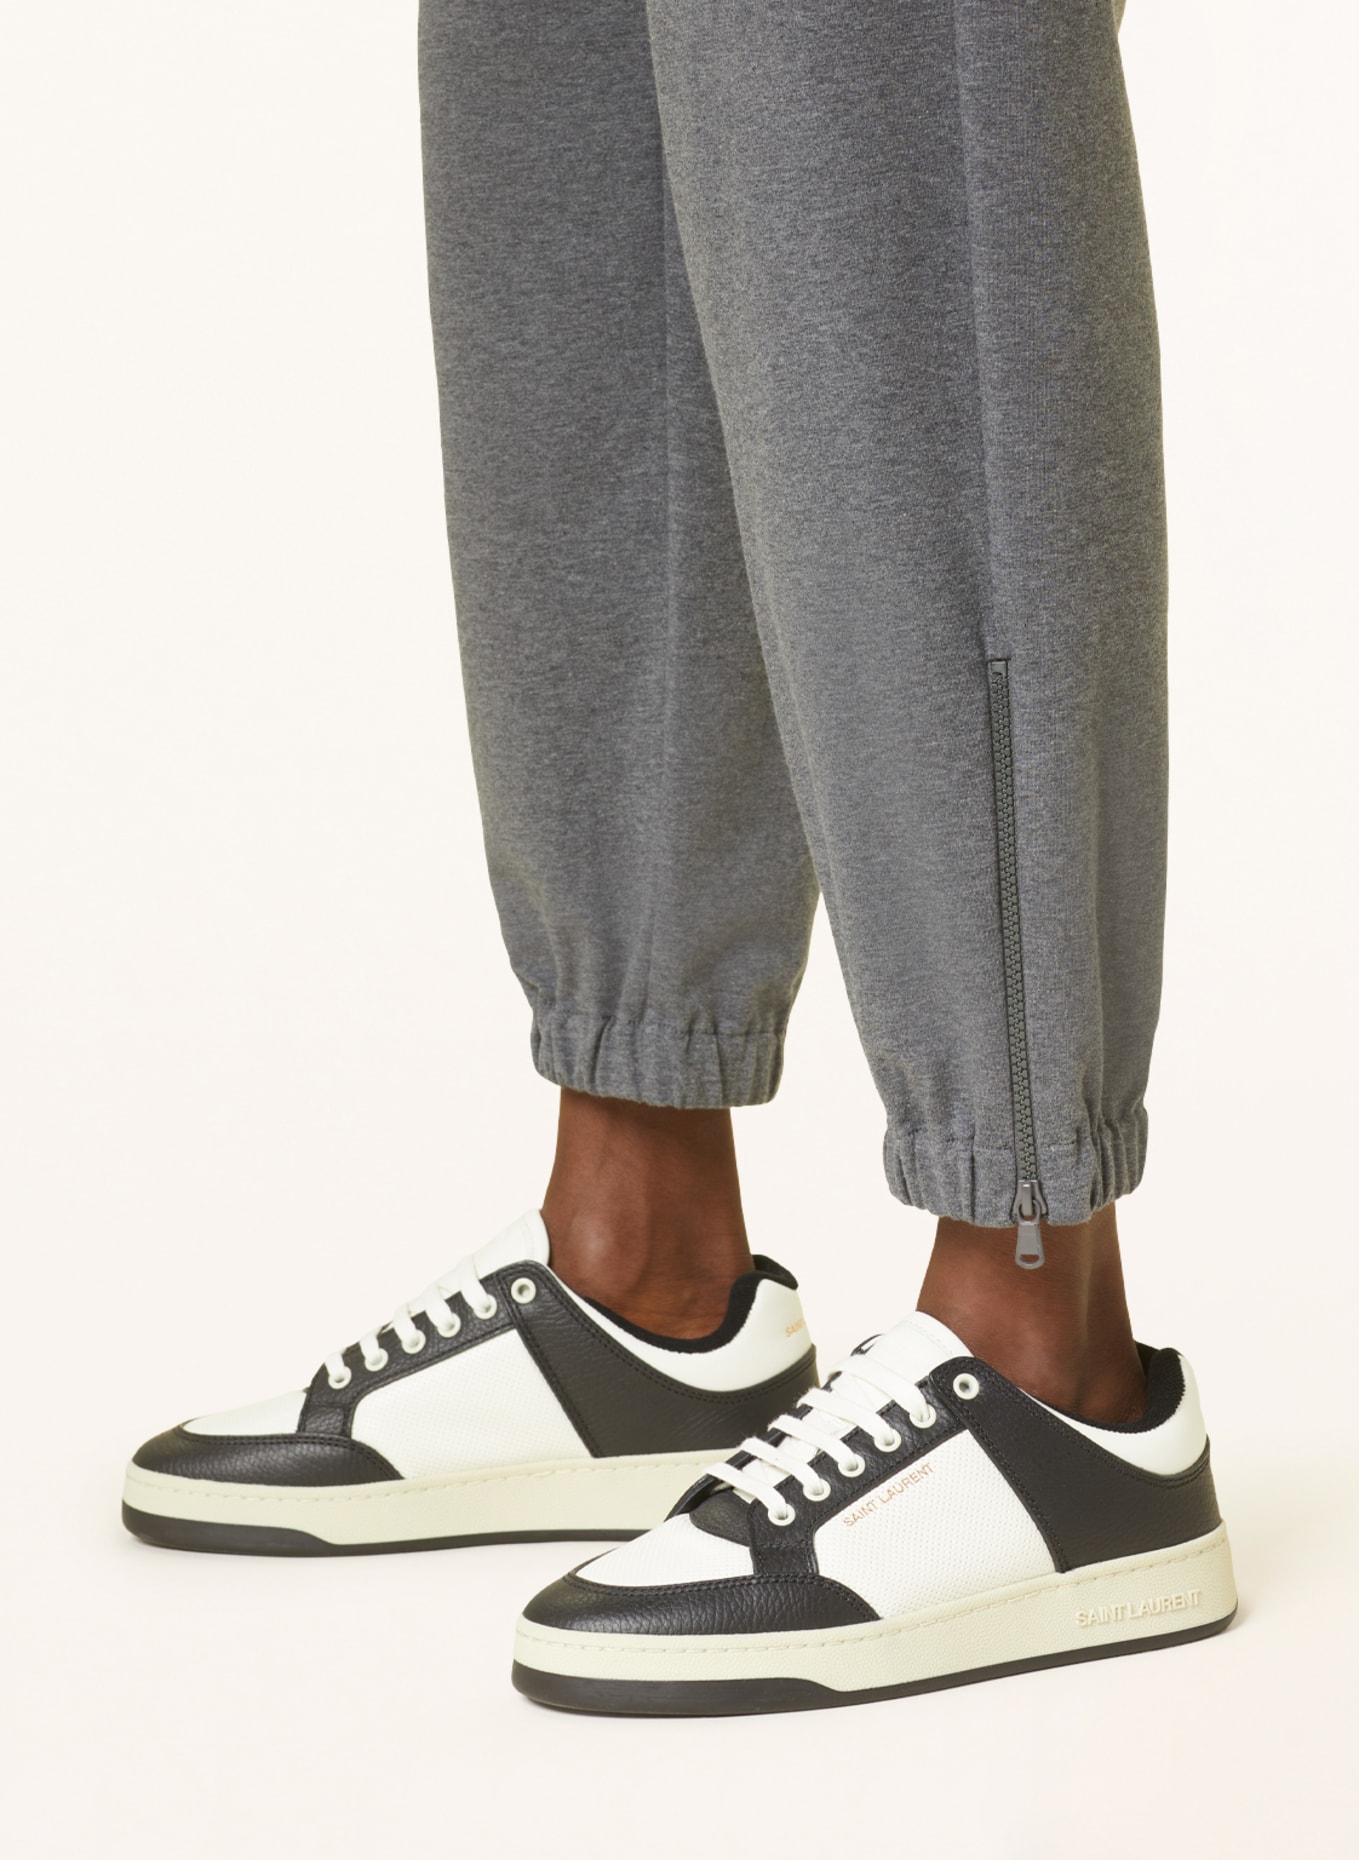 BRUNELLO CUCINELLI Pants in jogger style, Color: GRAY (Image 6)